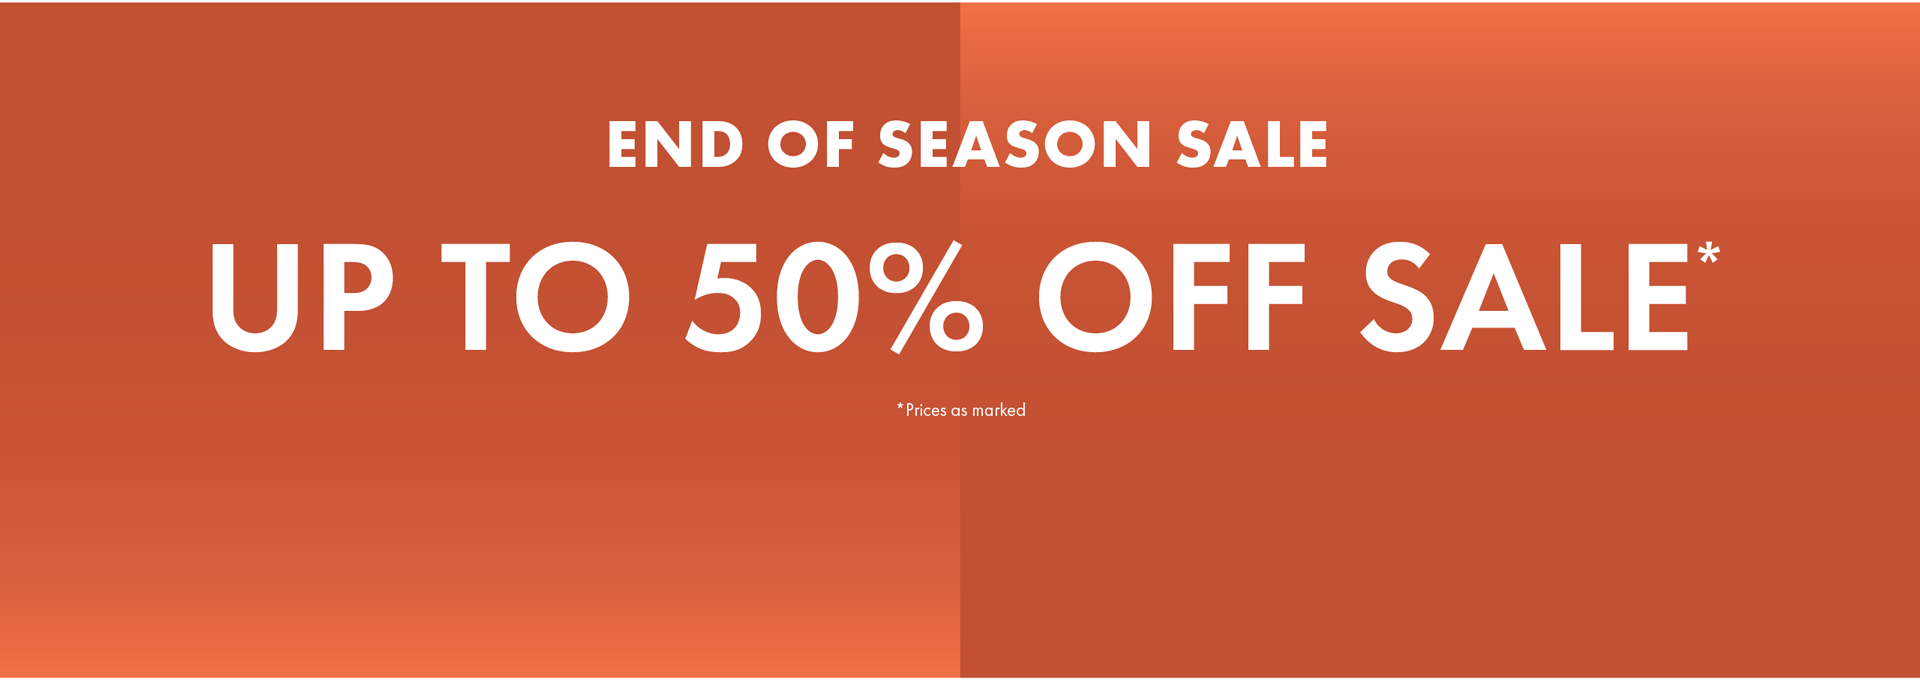 Up to 50% off Sale Items*